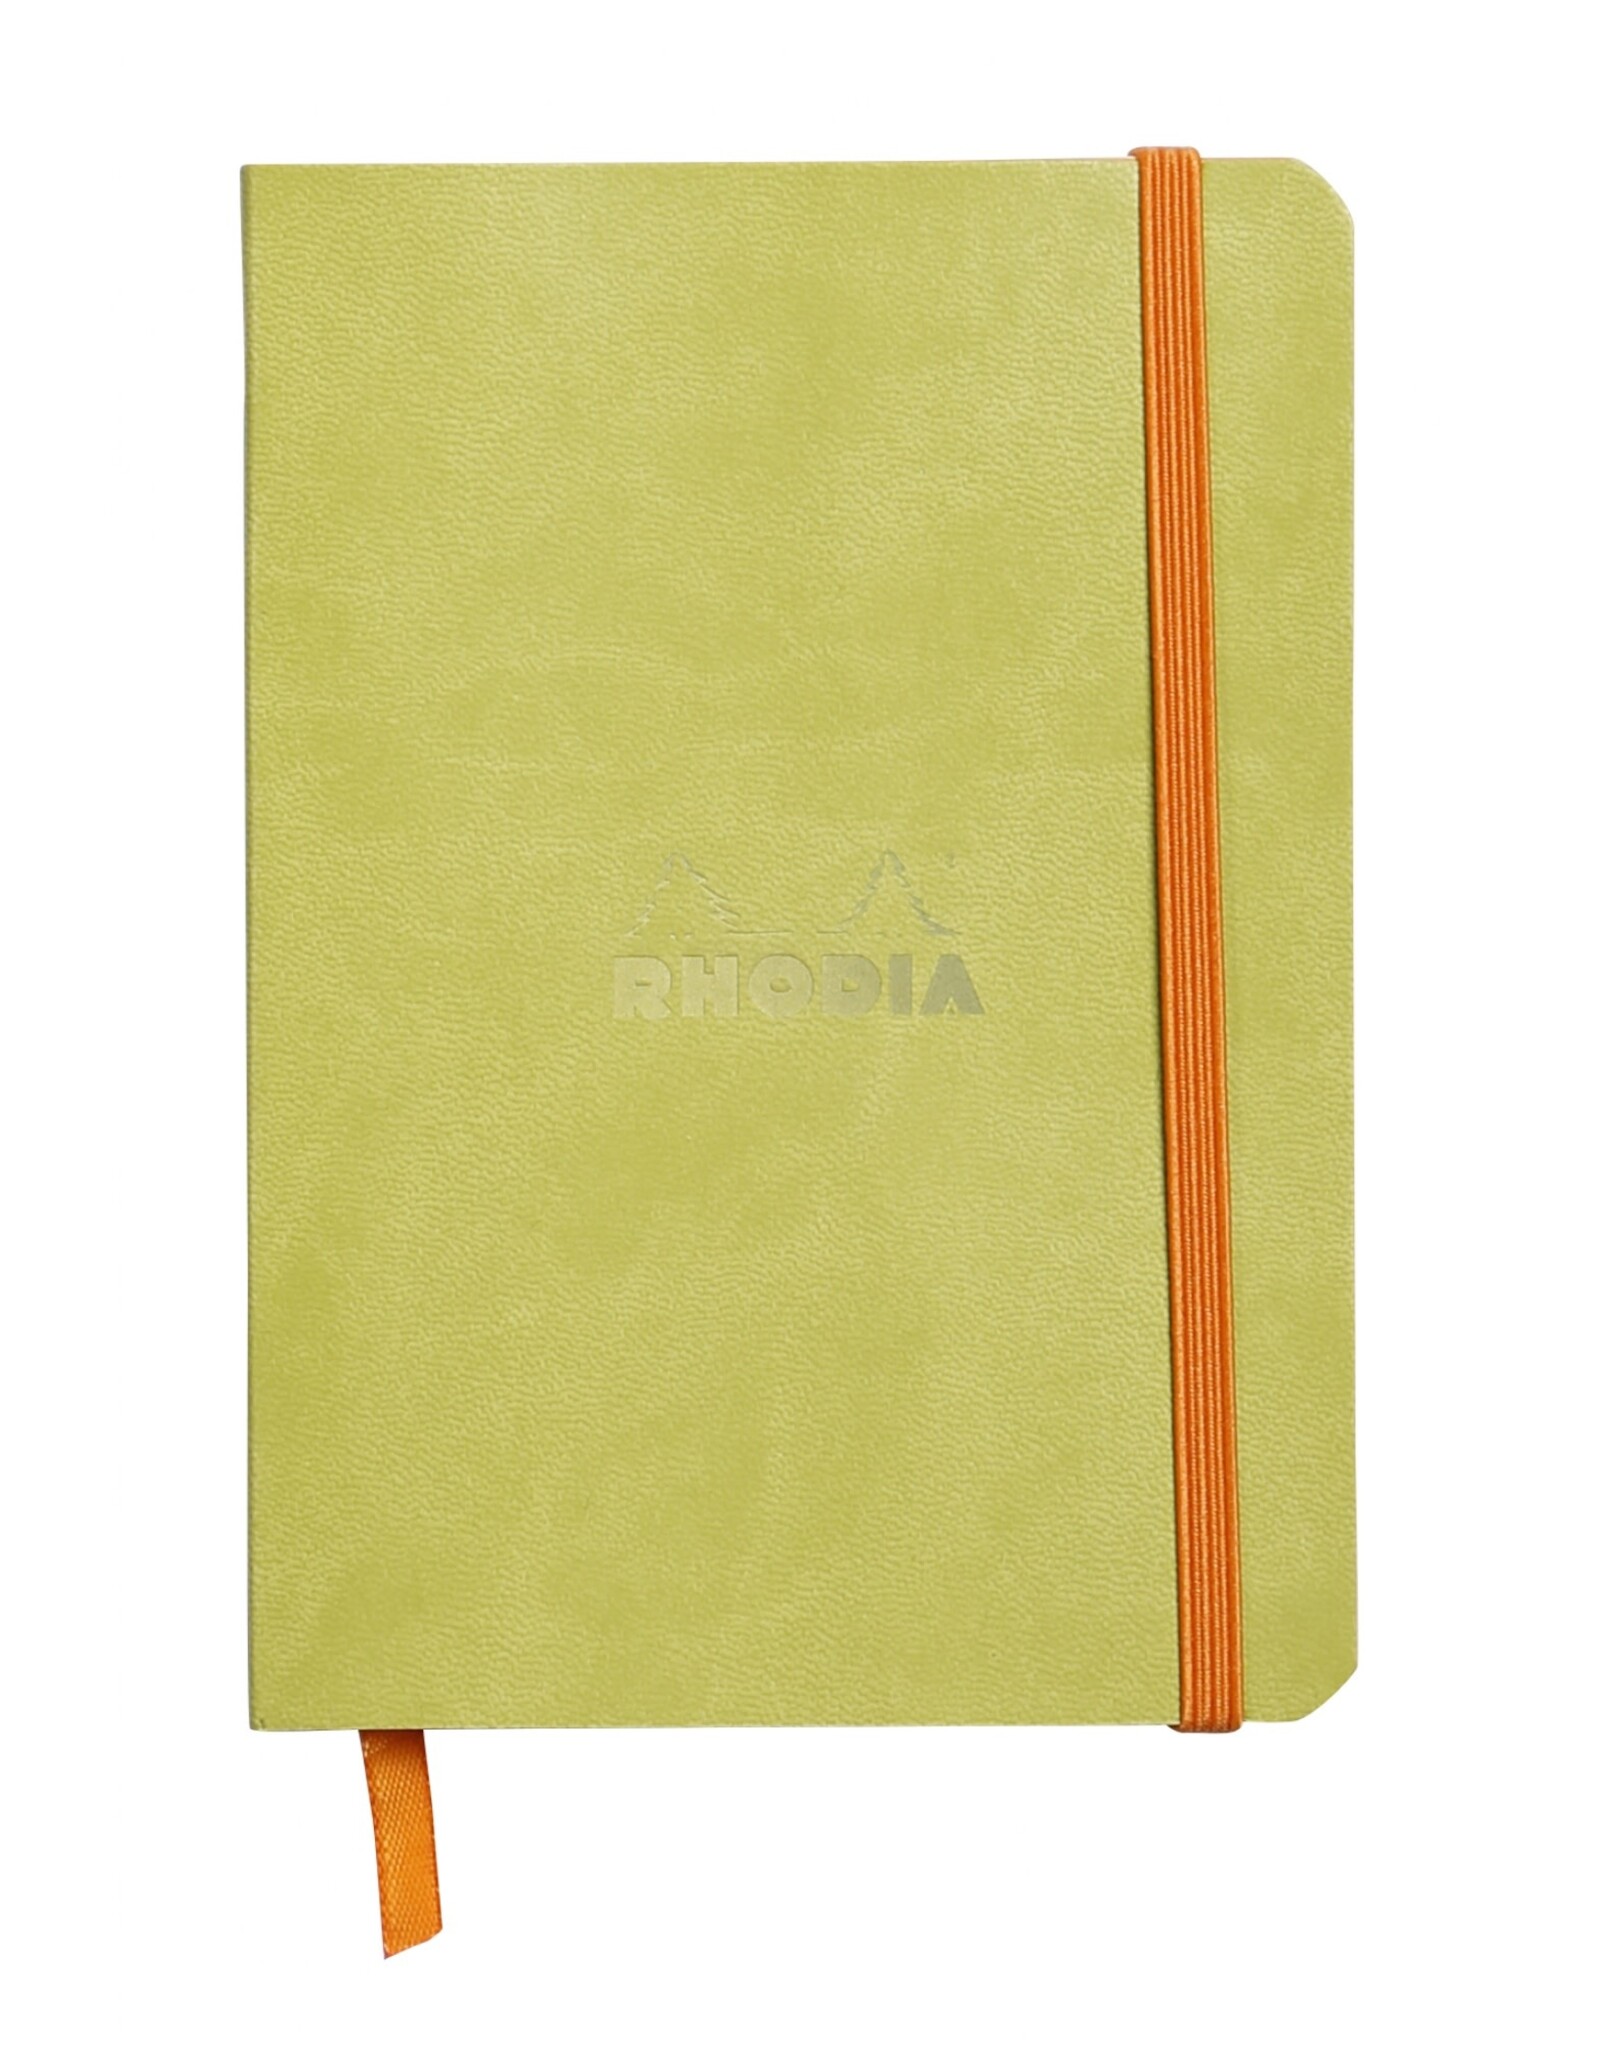 Rhodia Rhodia Rhodiarama SoftCover Notebook, 80 Dotted Sheets, 4" x 5 1/2", Anise